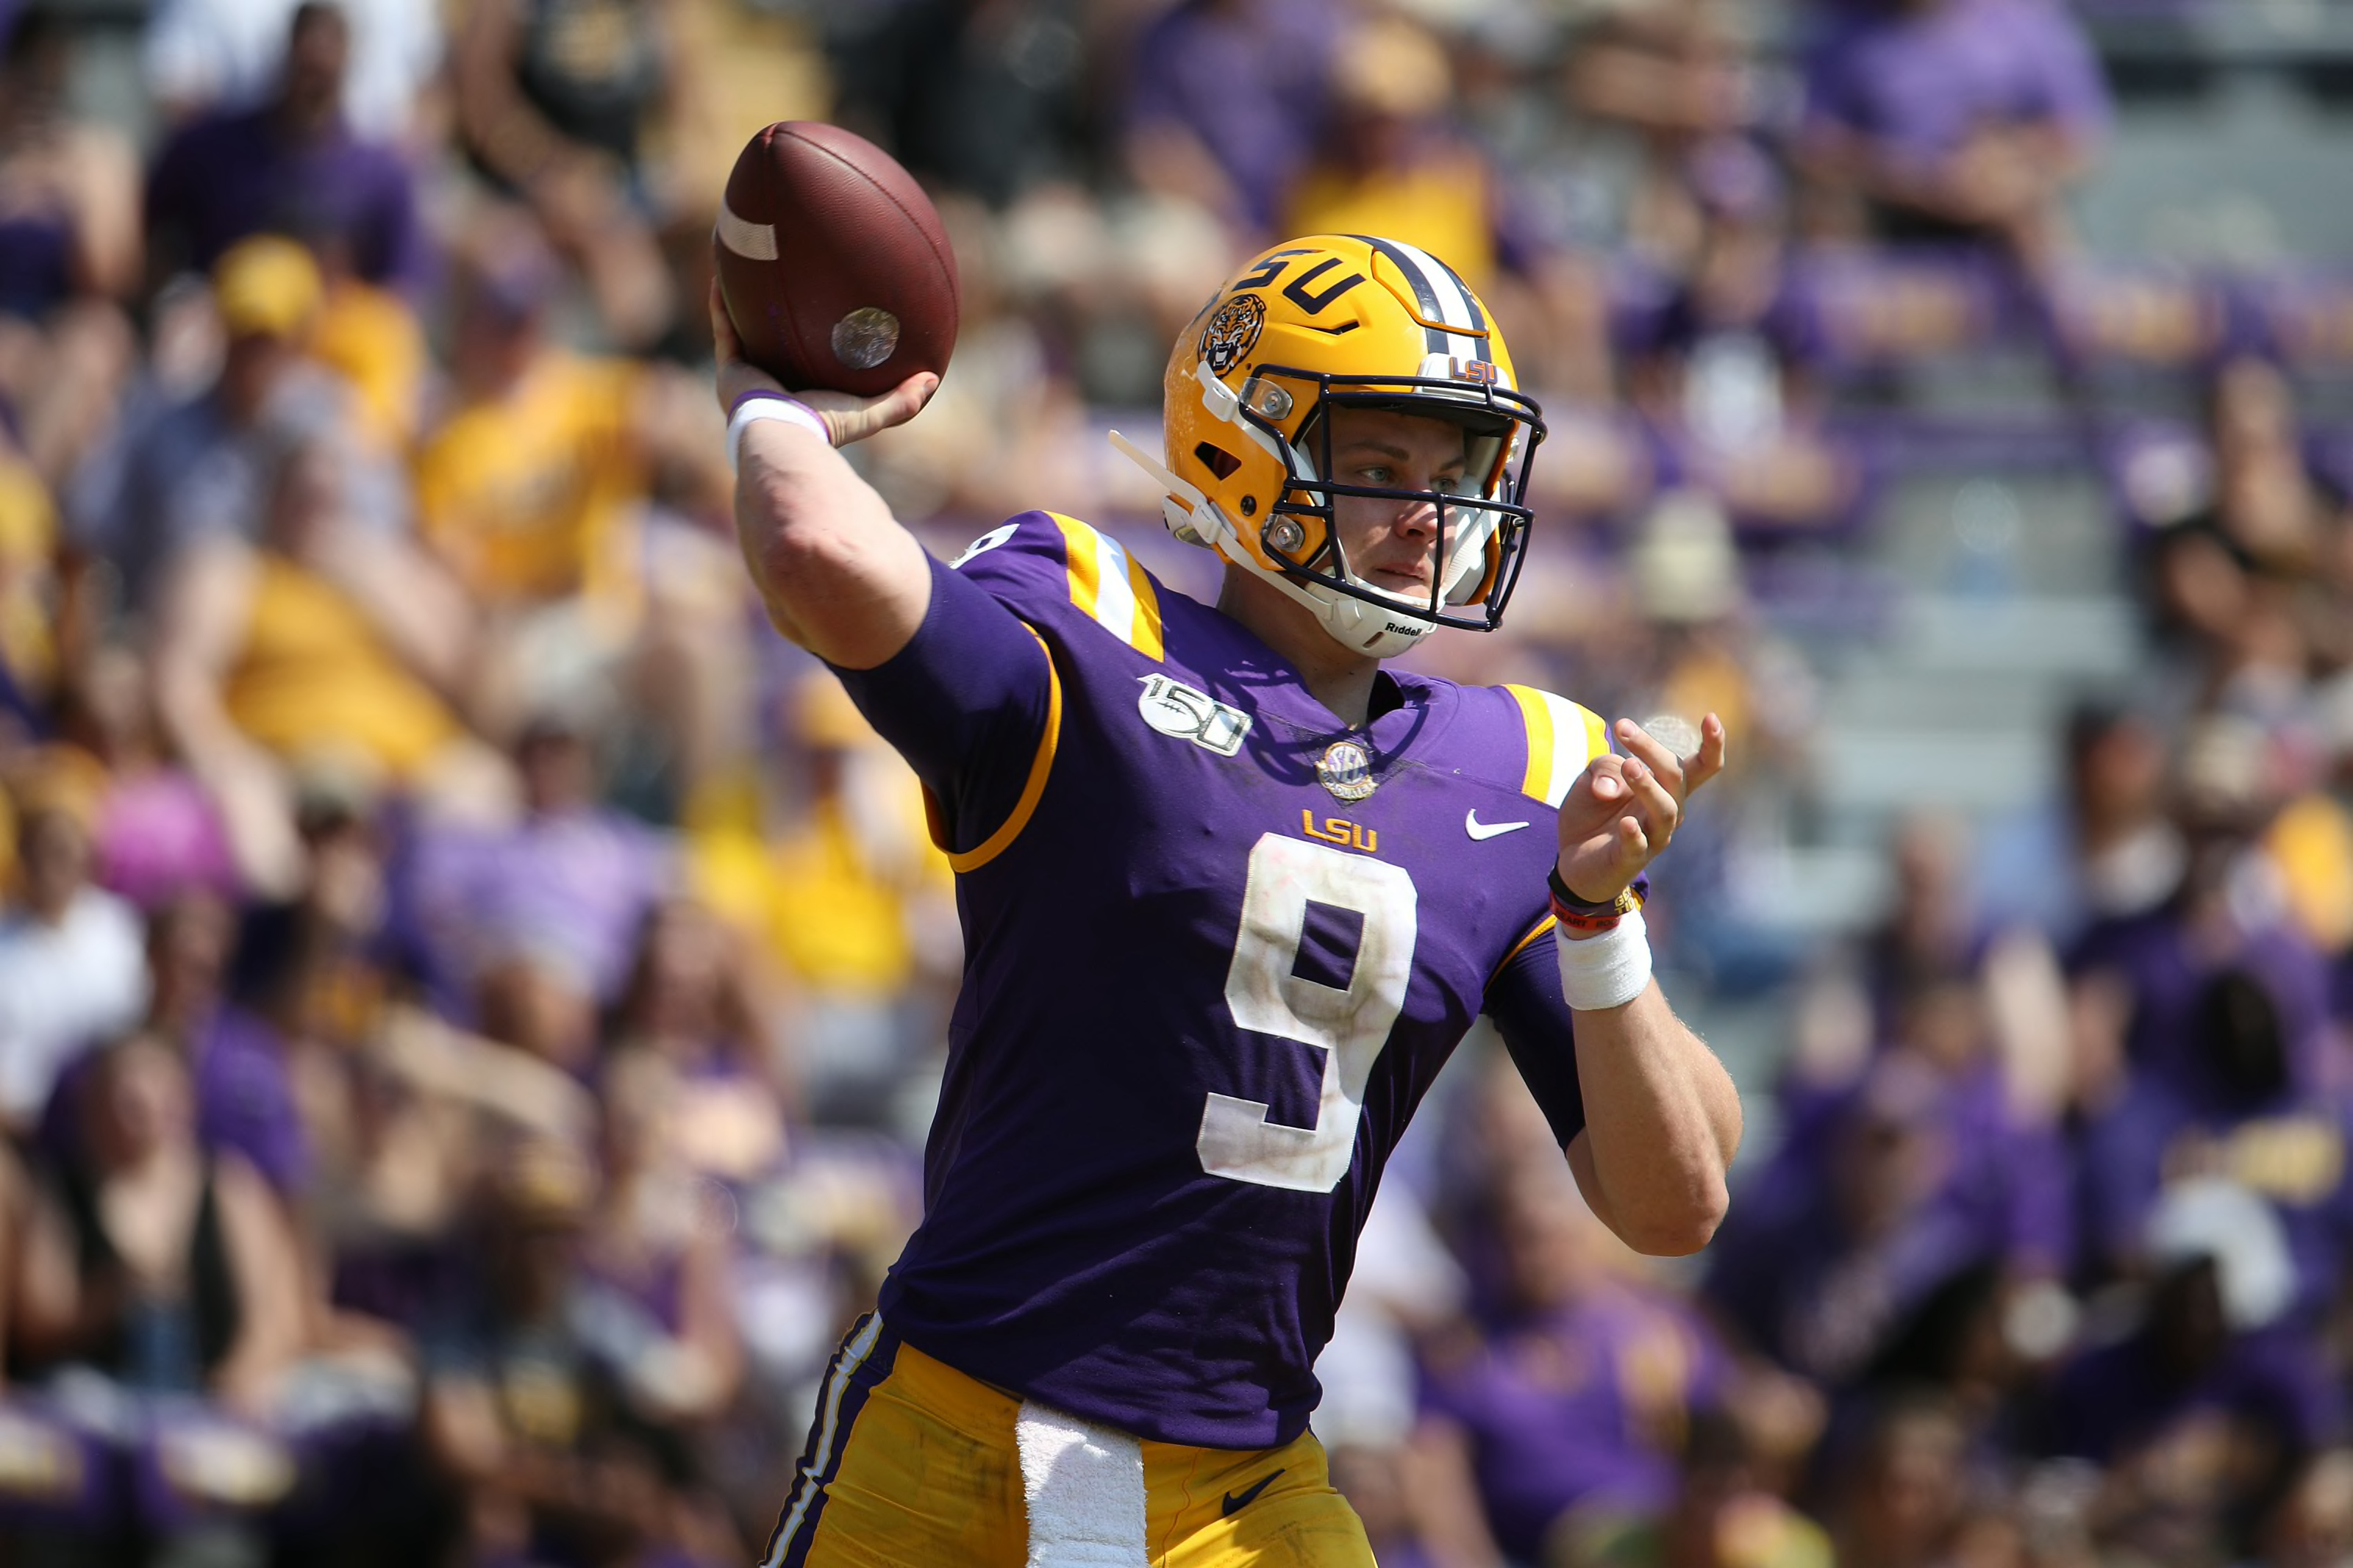 LSU football 3 reasons the Tigers will topple Florida in Week 7 Page 2